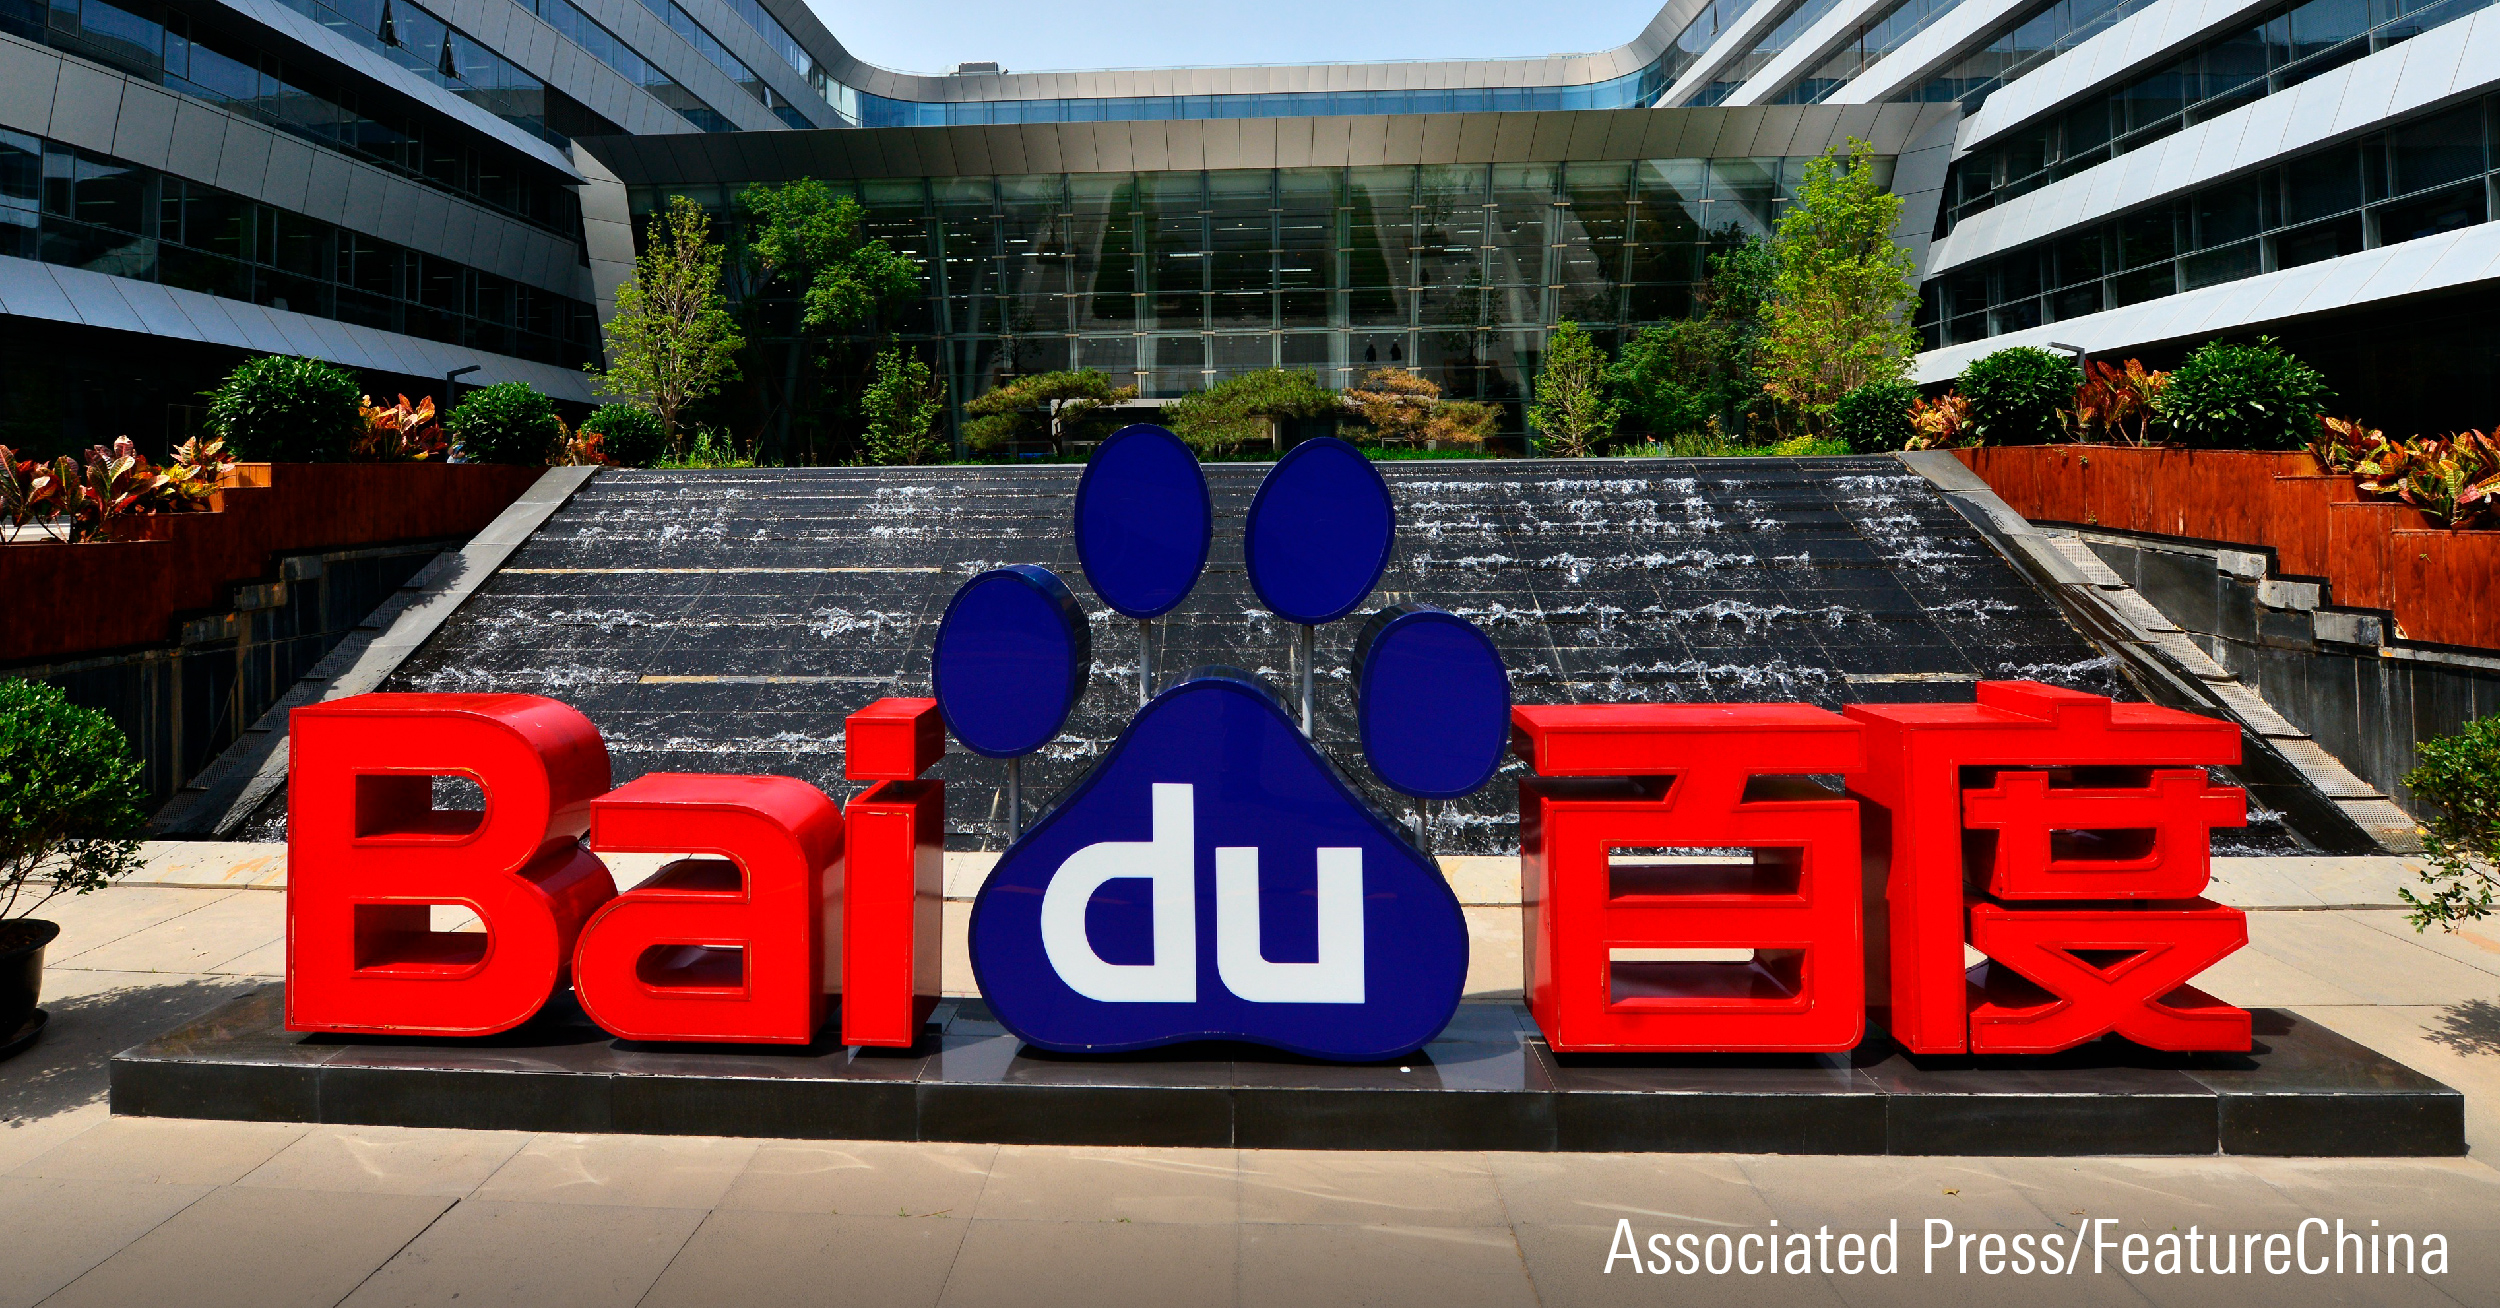 A view of the headquarter buildings of Baidu, China's dominant search engine, in Zhongguancun Software Park in Beijing, China Tuesday, May 14, 2019.